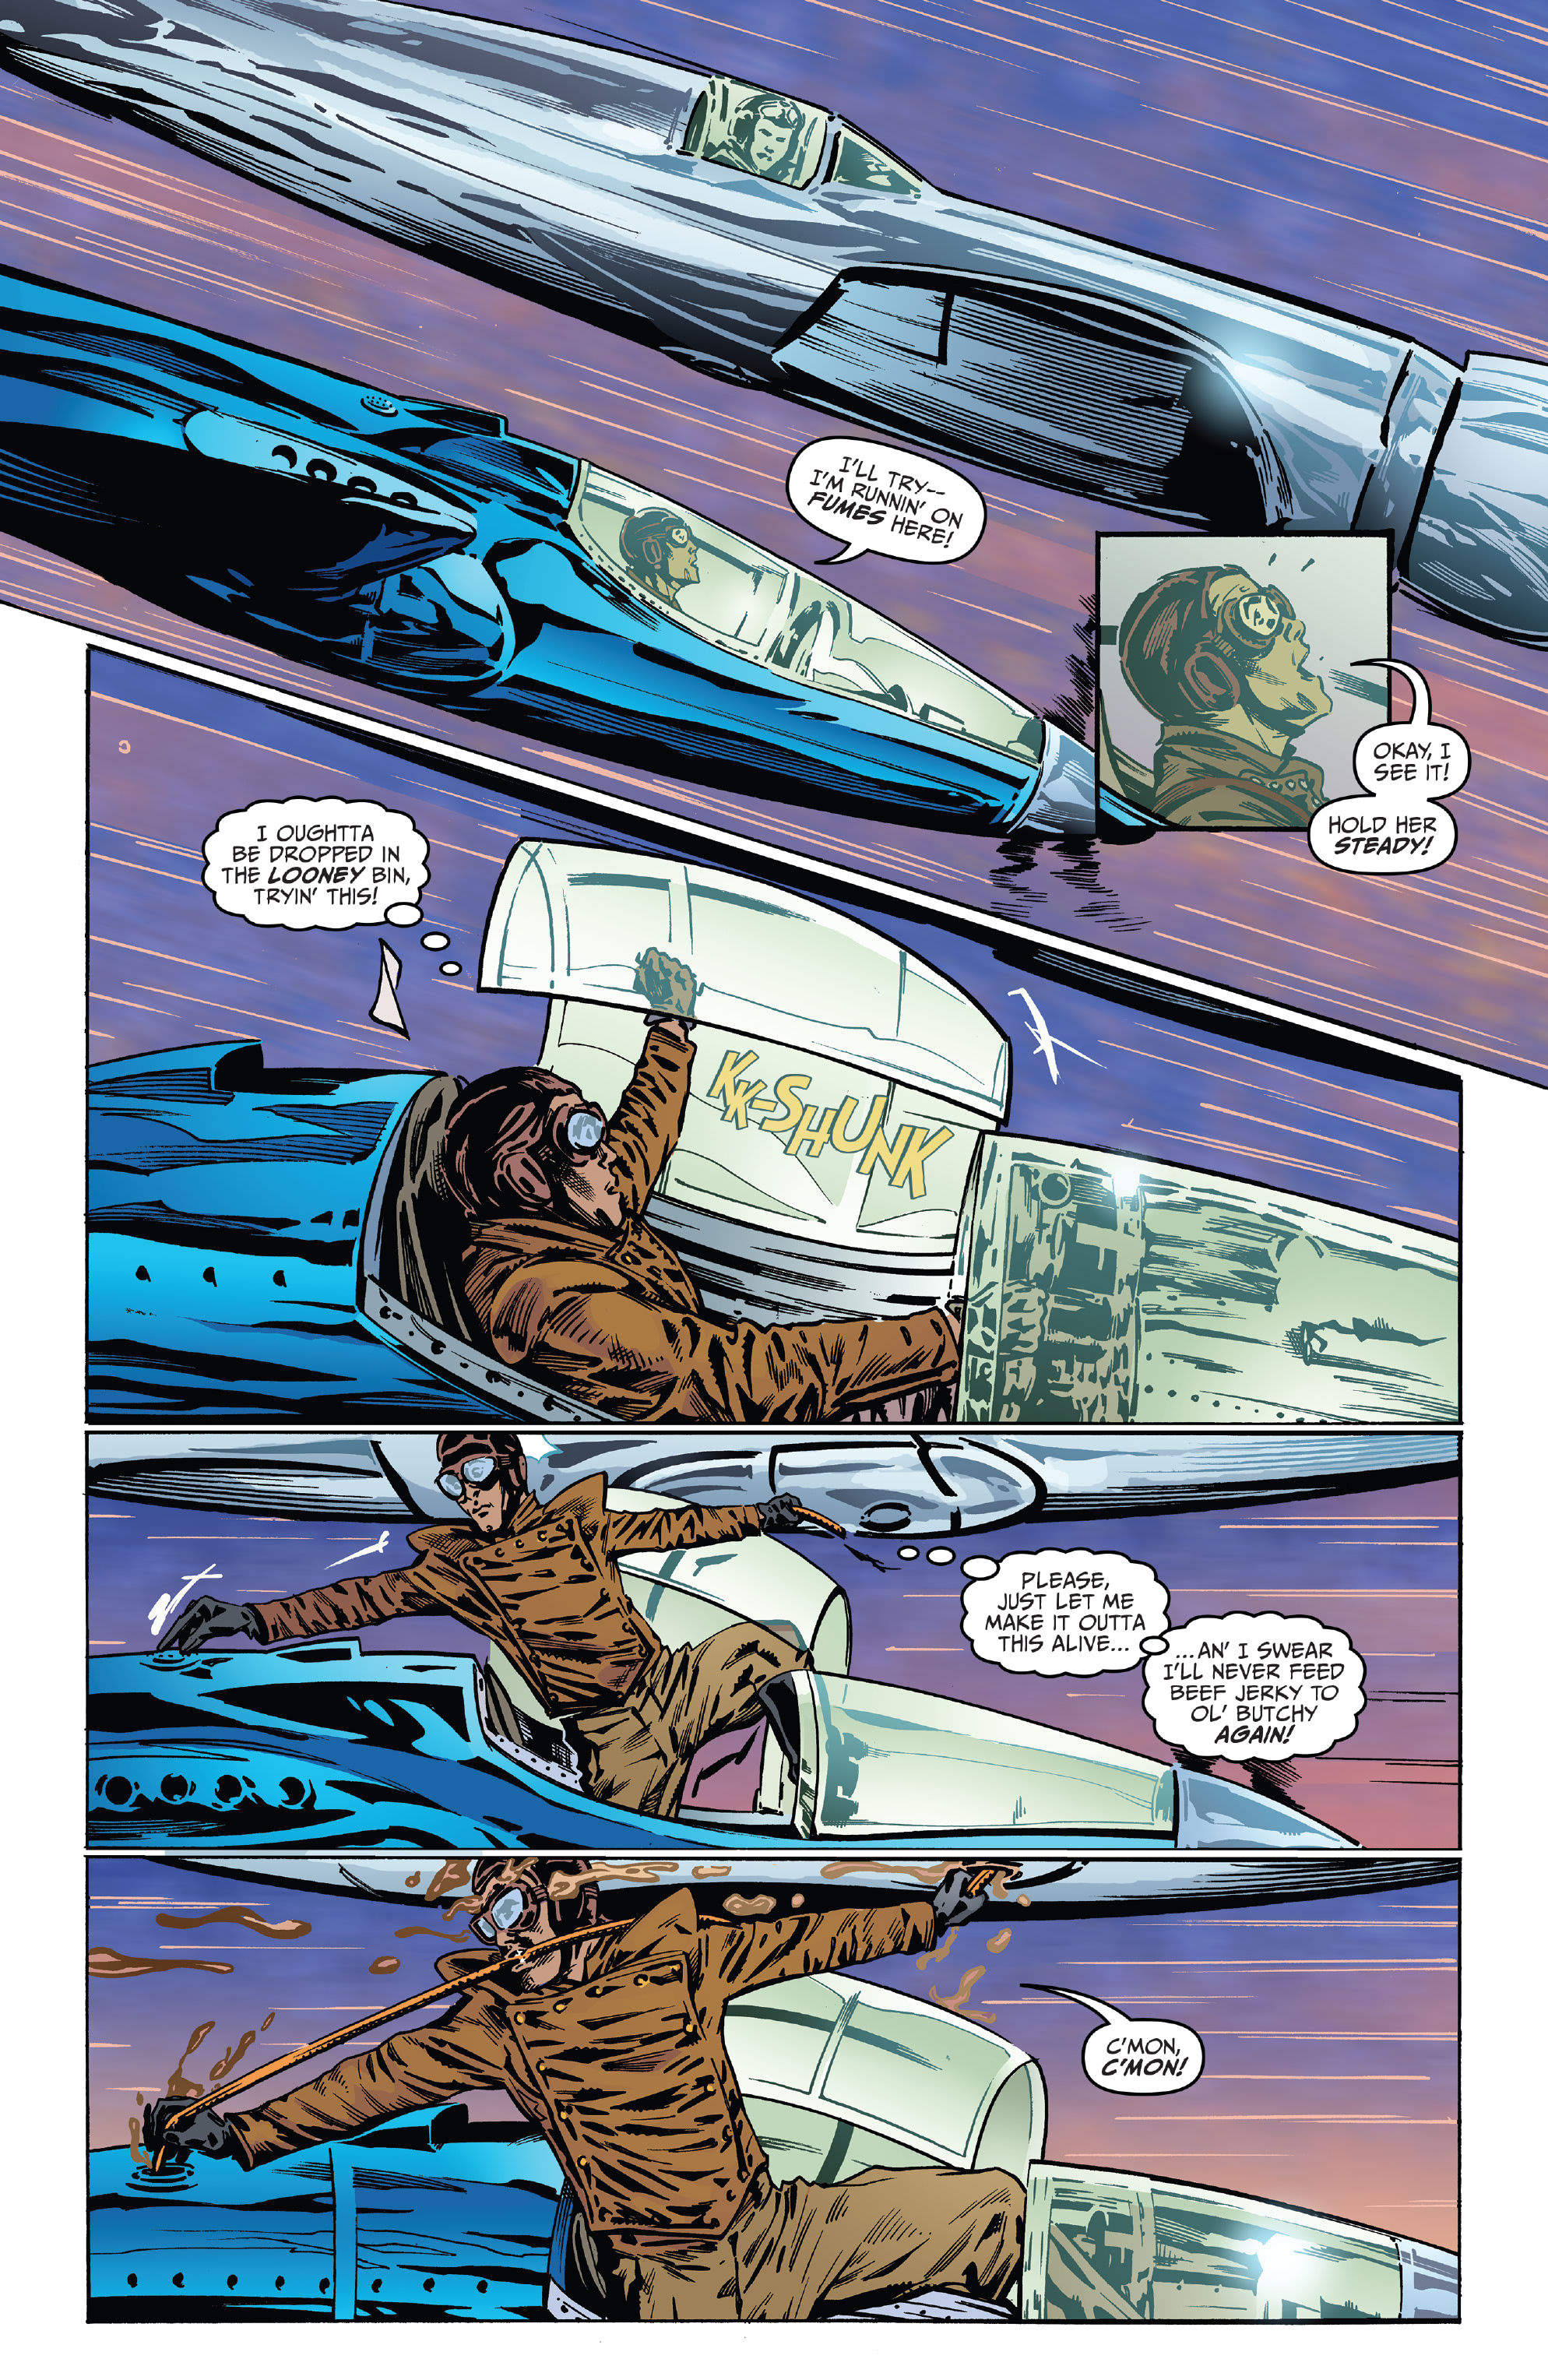 The Rocketeer: The Great Race (2022-): Chapter 3 - Page 4